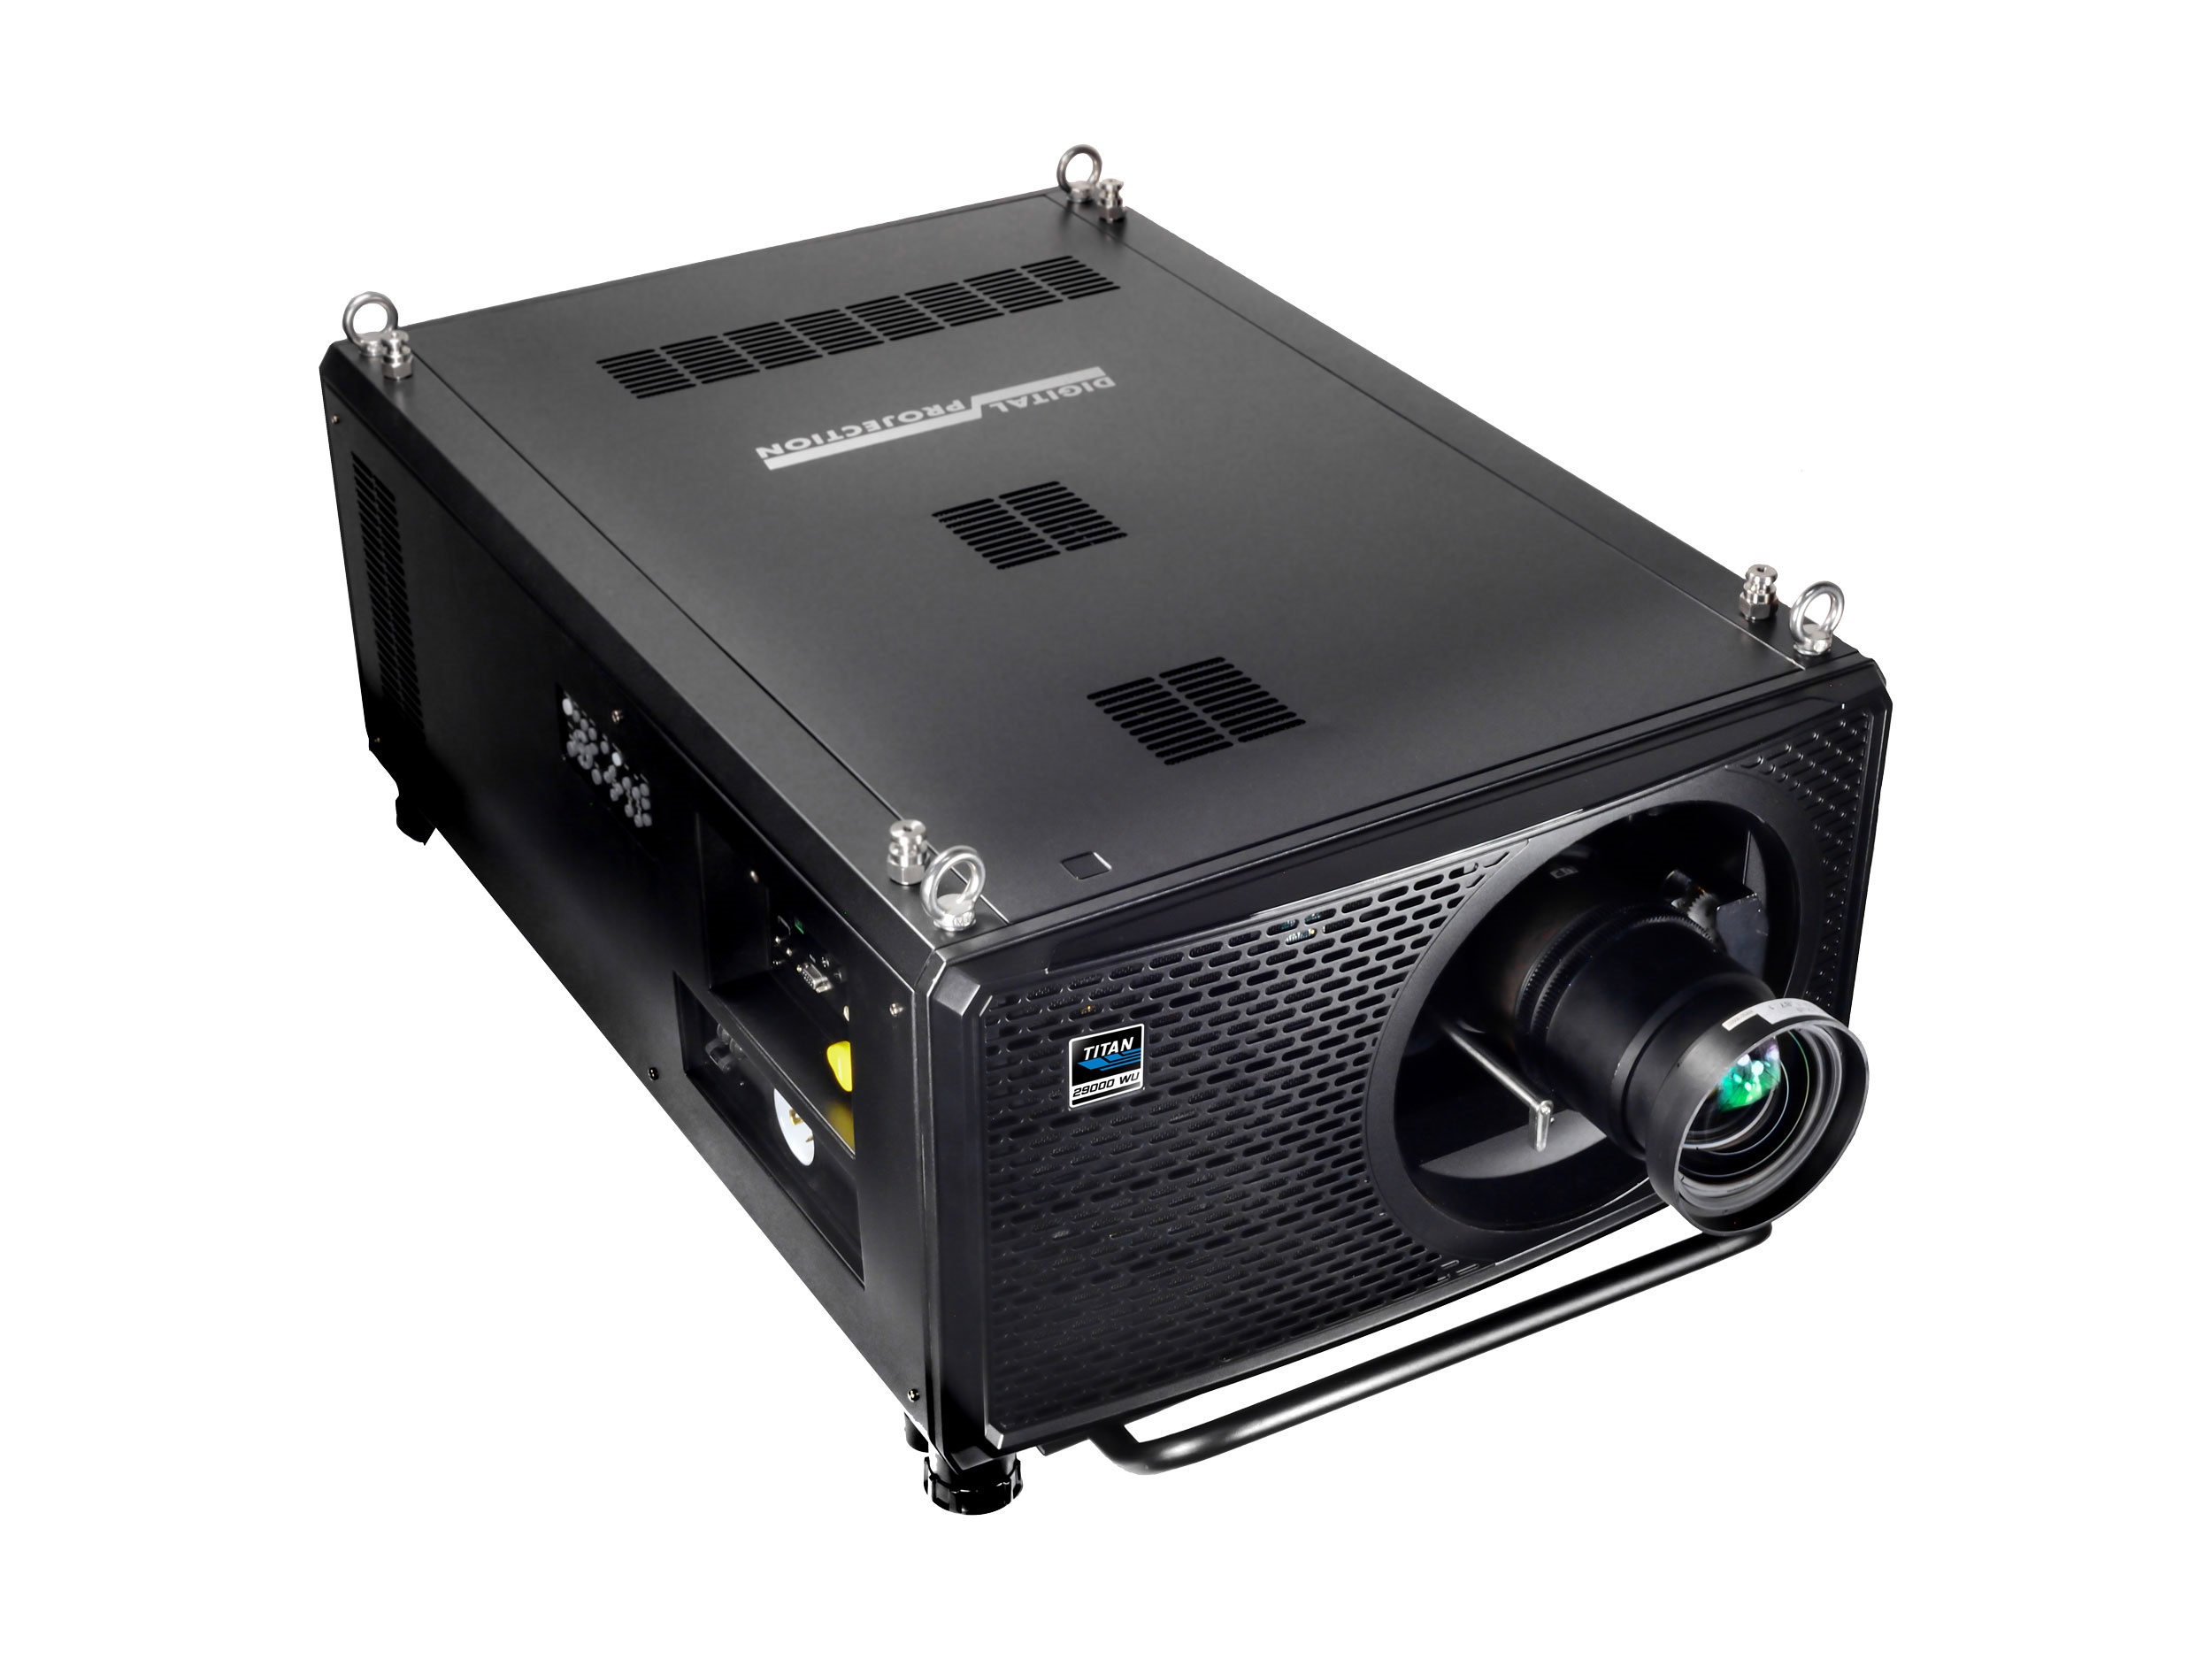 TITAN 29000 WU 29000 Lumens/WUXGA Resolution/Compatible with Prior TITAN Lenses Projector by Digital Projection